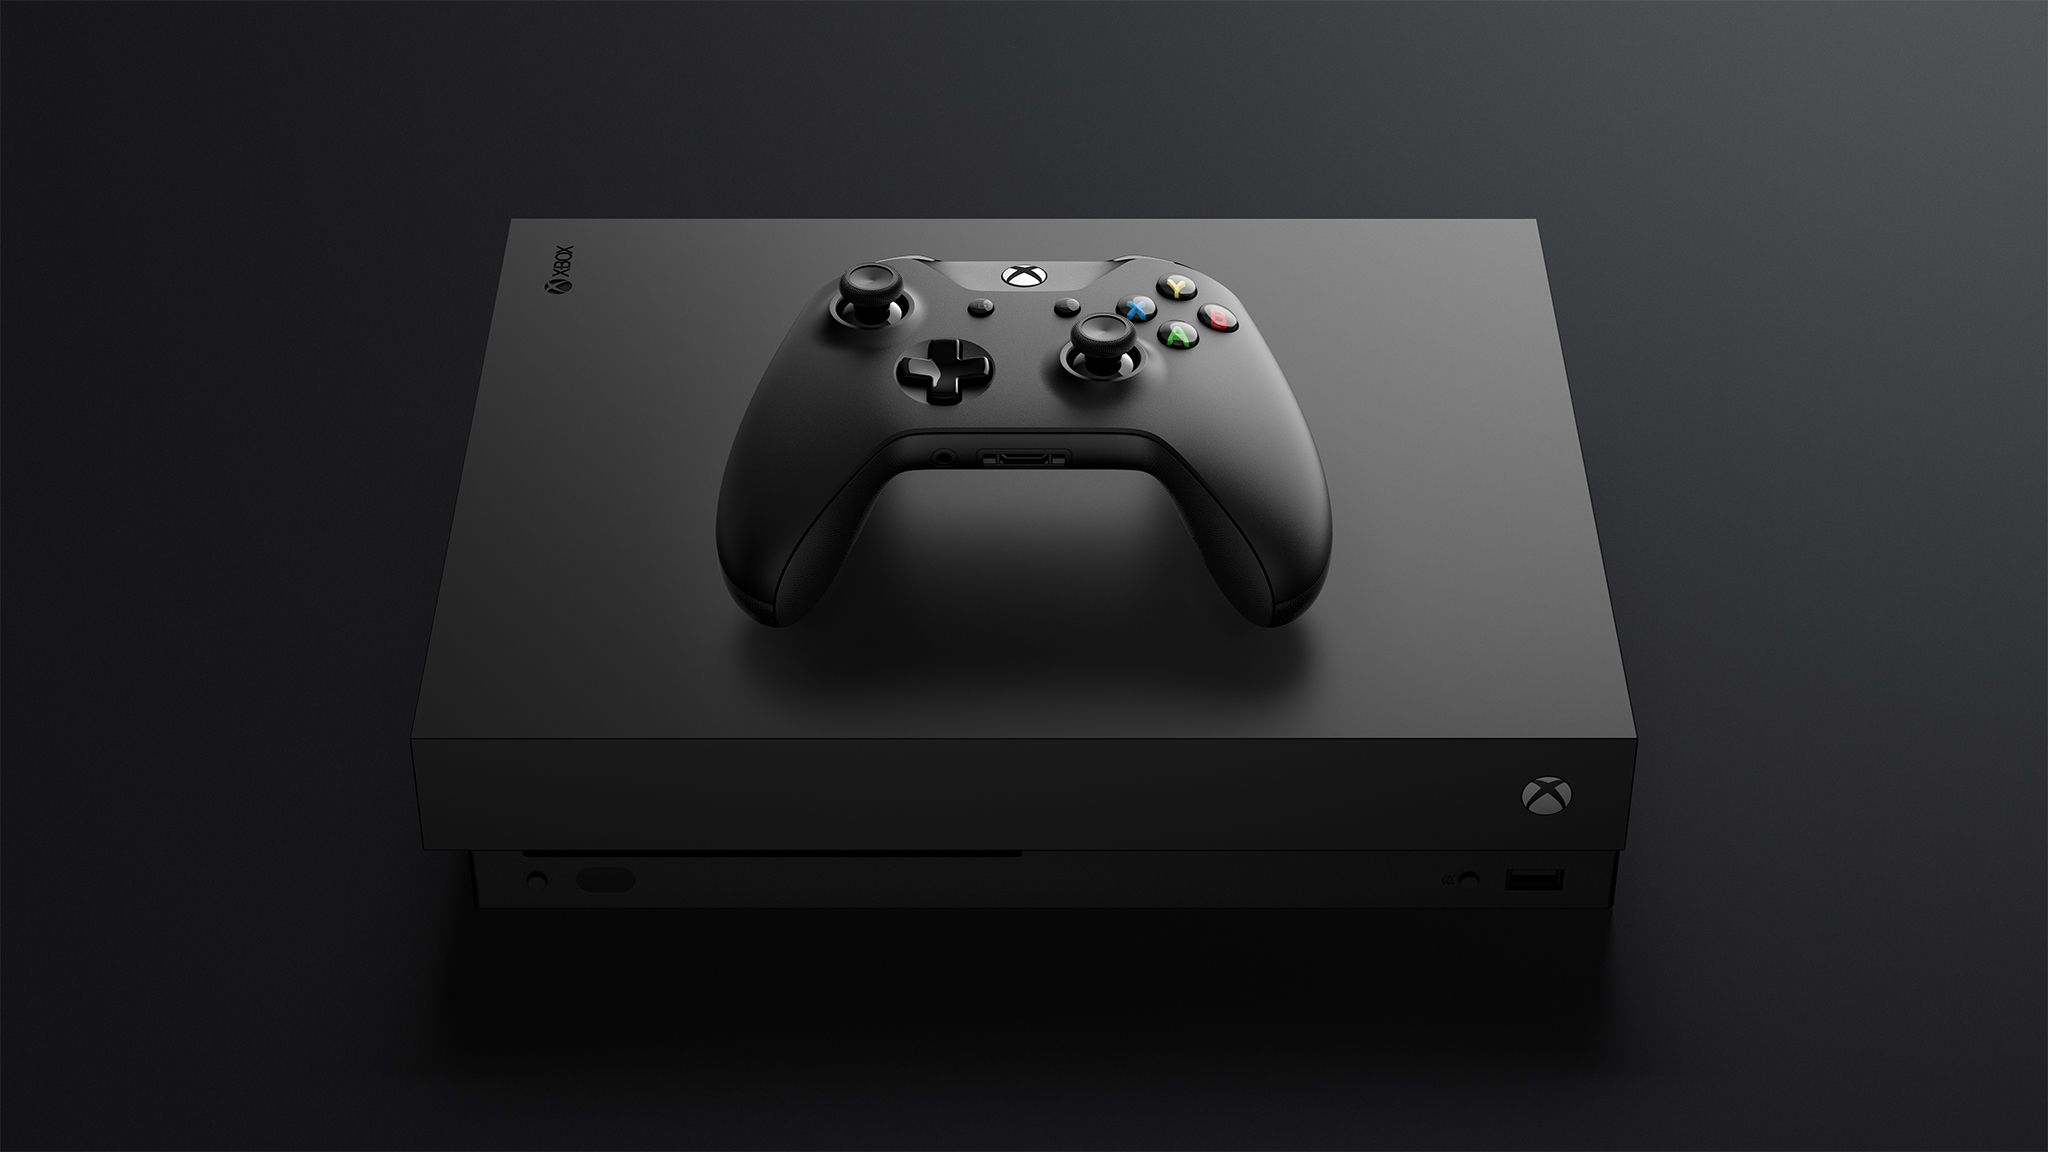 will xbox one x games work on xbox one